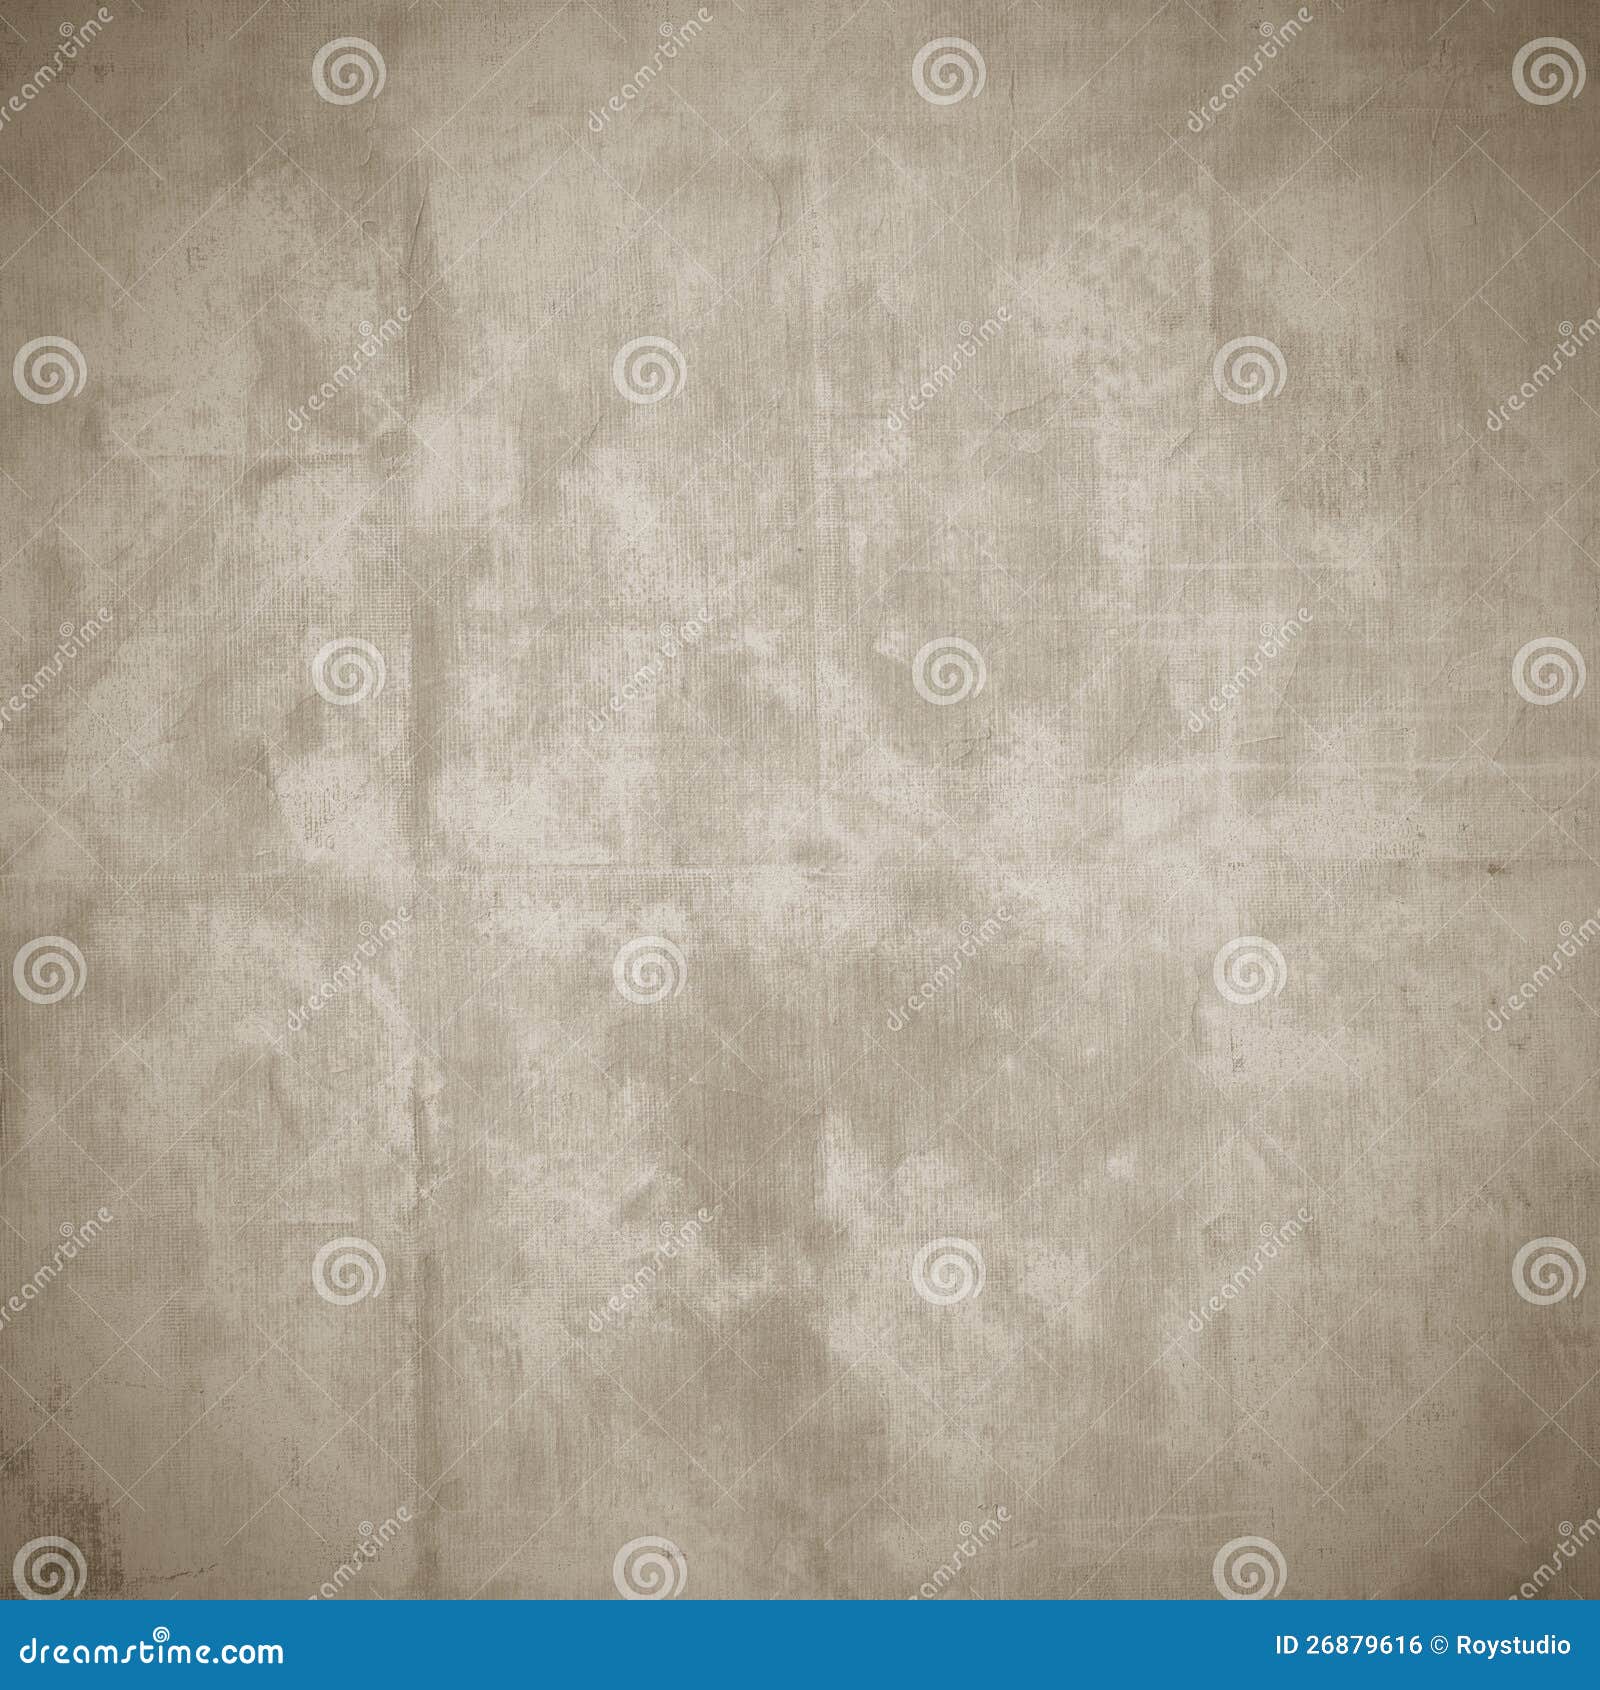 old natural fabric texture, grunge background